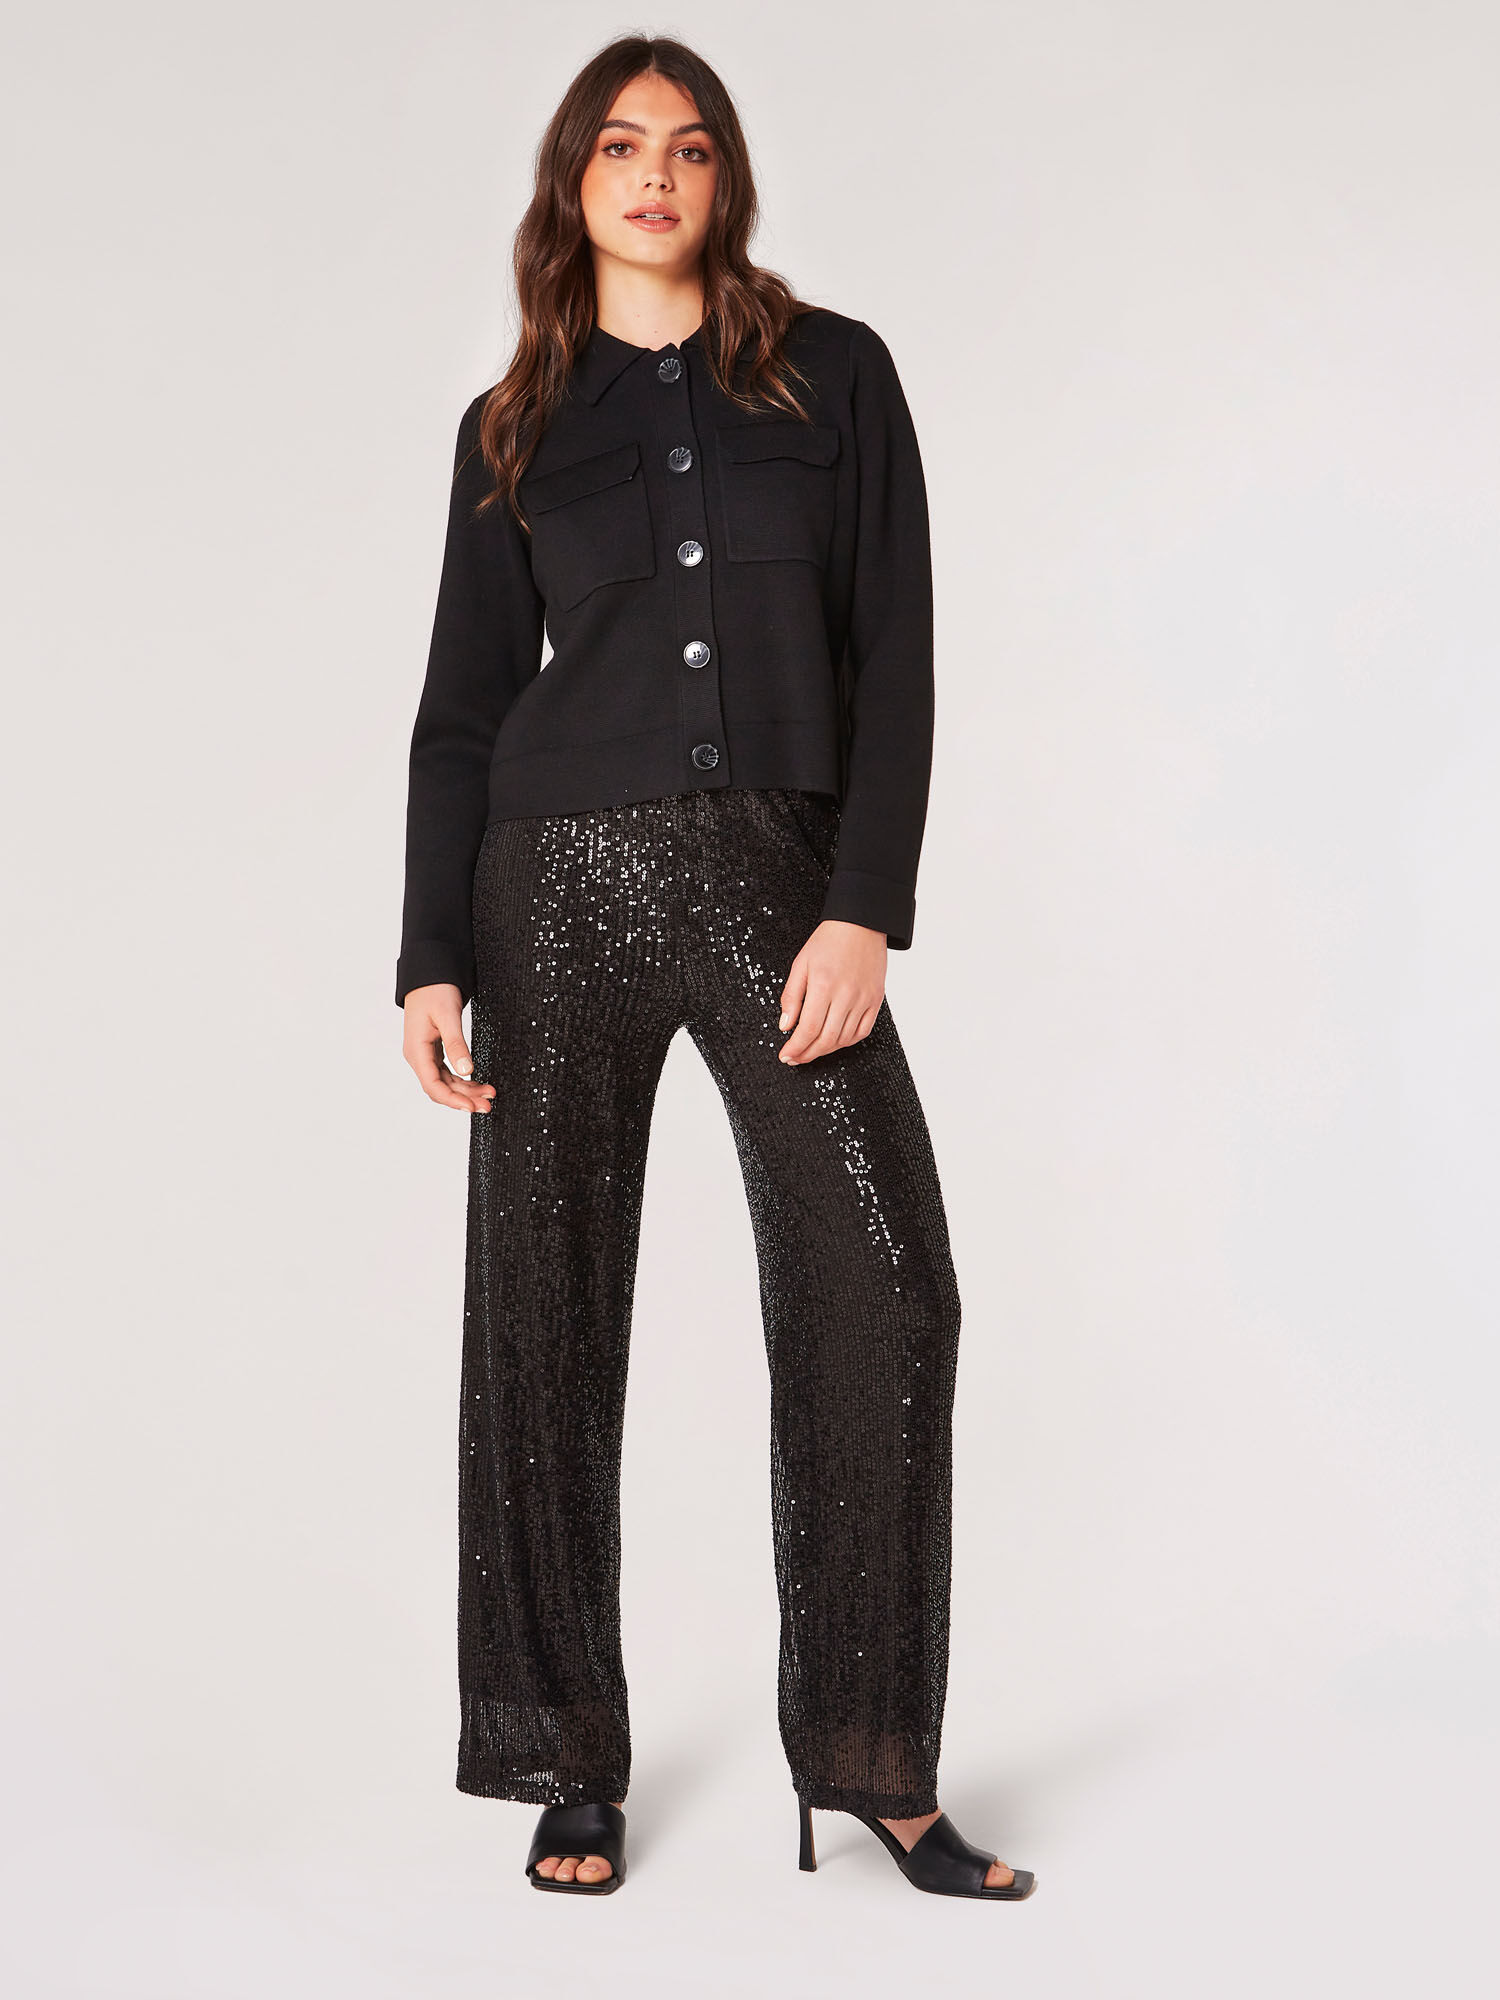 Robell Cindy Elasticated Waist Sequin Flared Trouser Silver/black 99